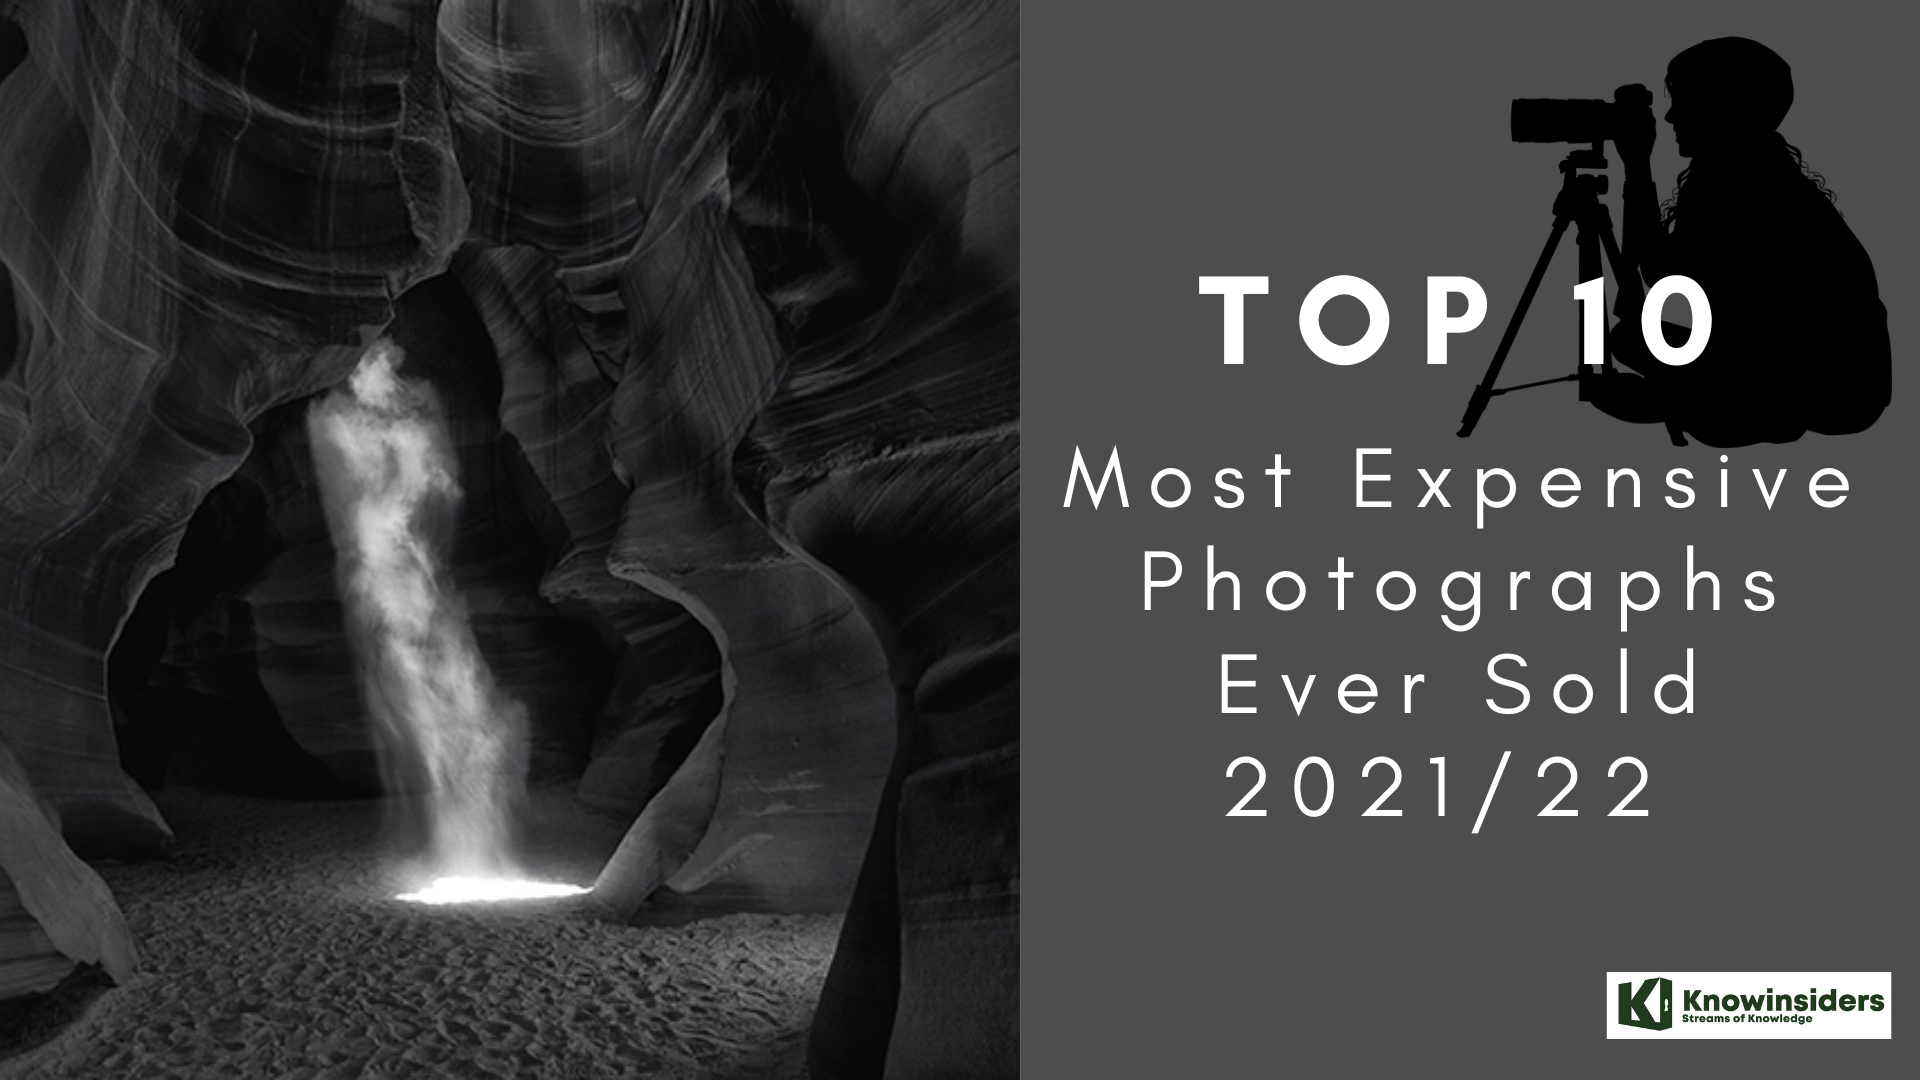 Top 10 World's Most Expensive Photographs of All Time